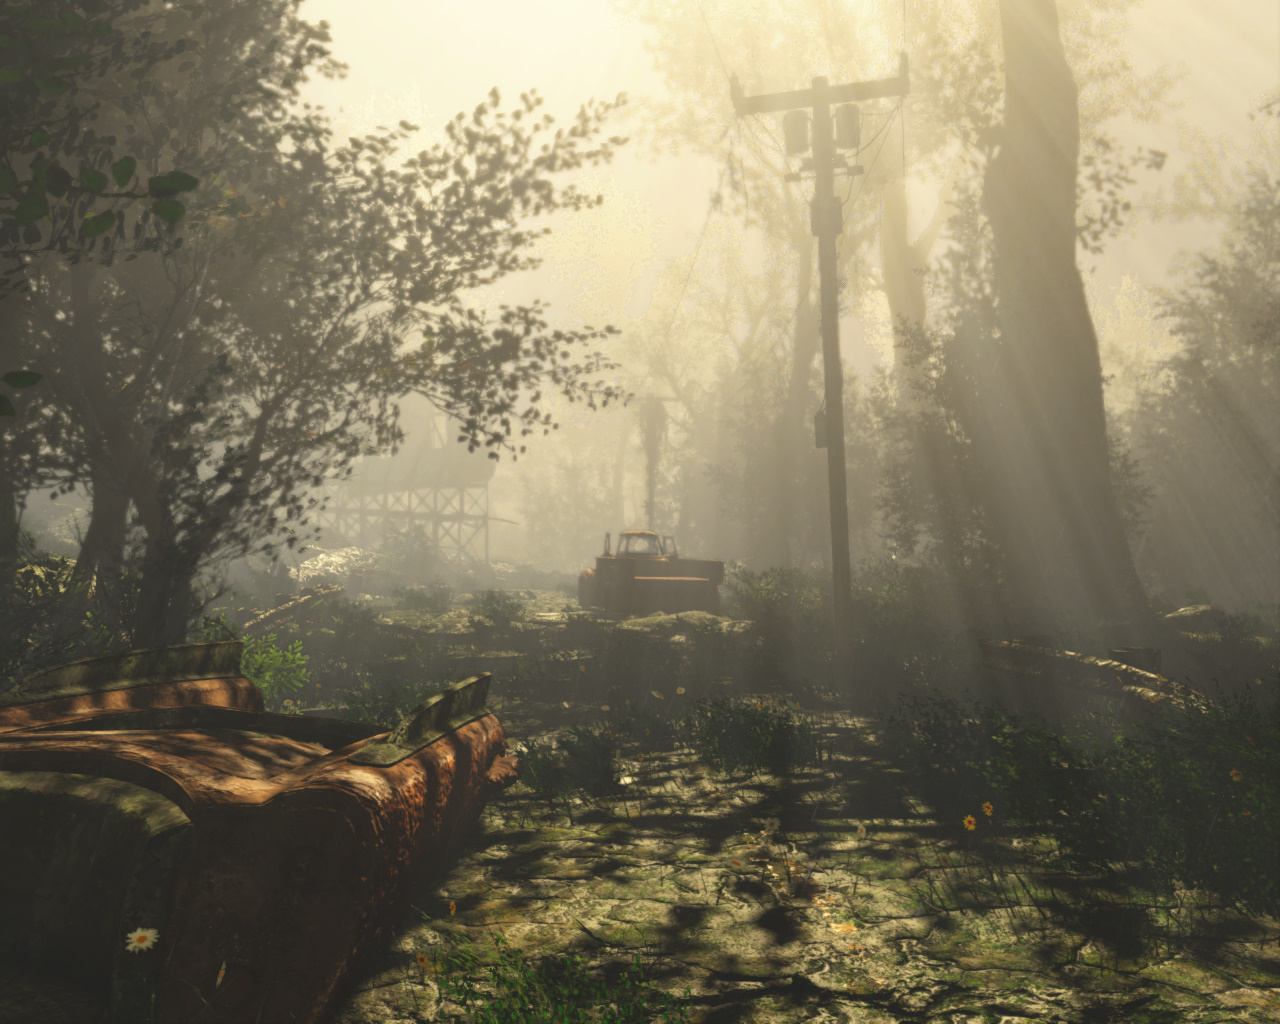 the forest mod download